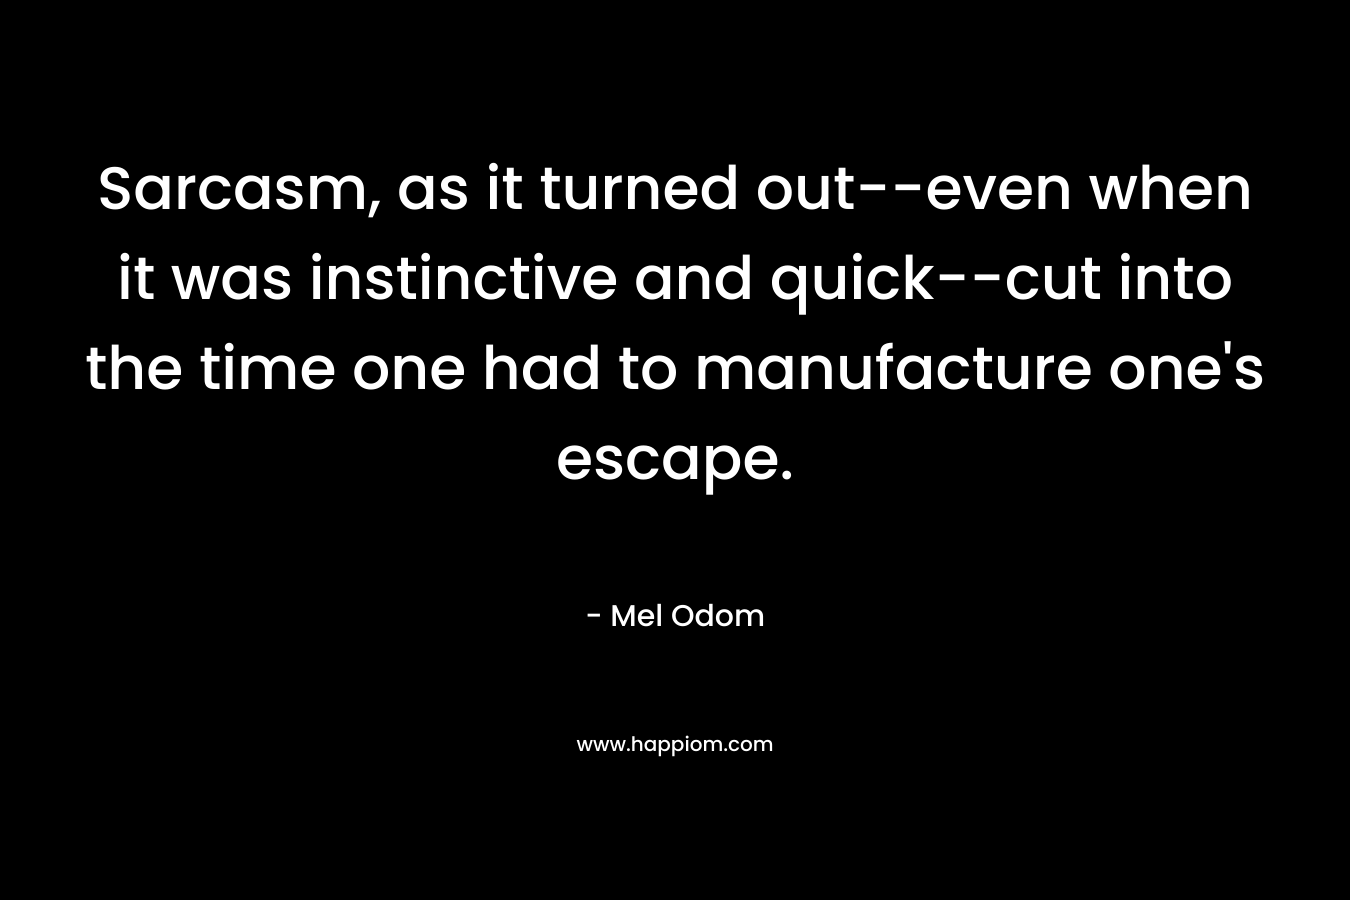 Sarcasm, as it turned out–even when it was instinctive and quick–cut into the time one had to manufacture one’s escape. – Mel Odom